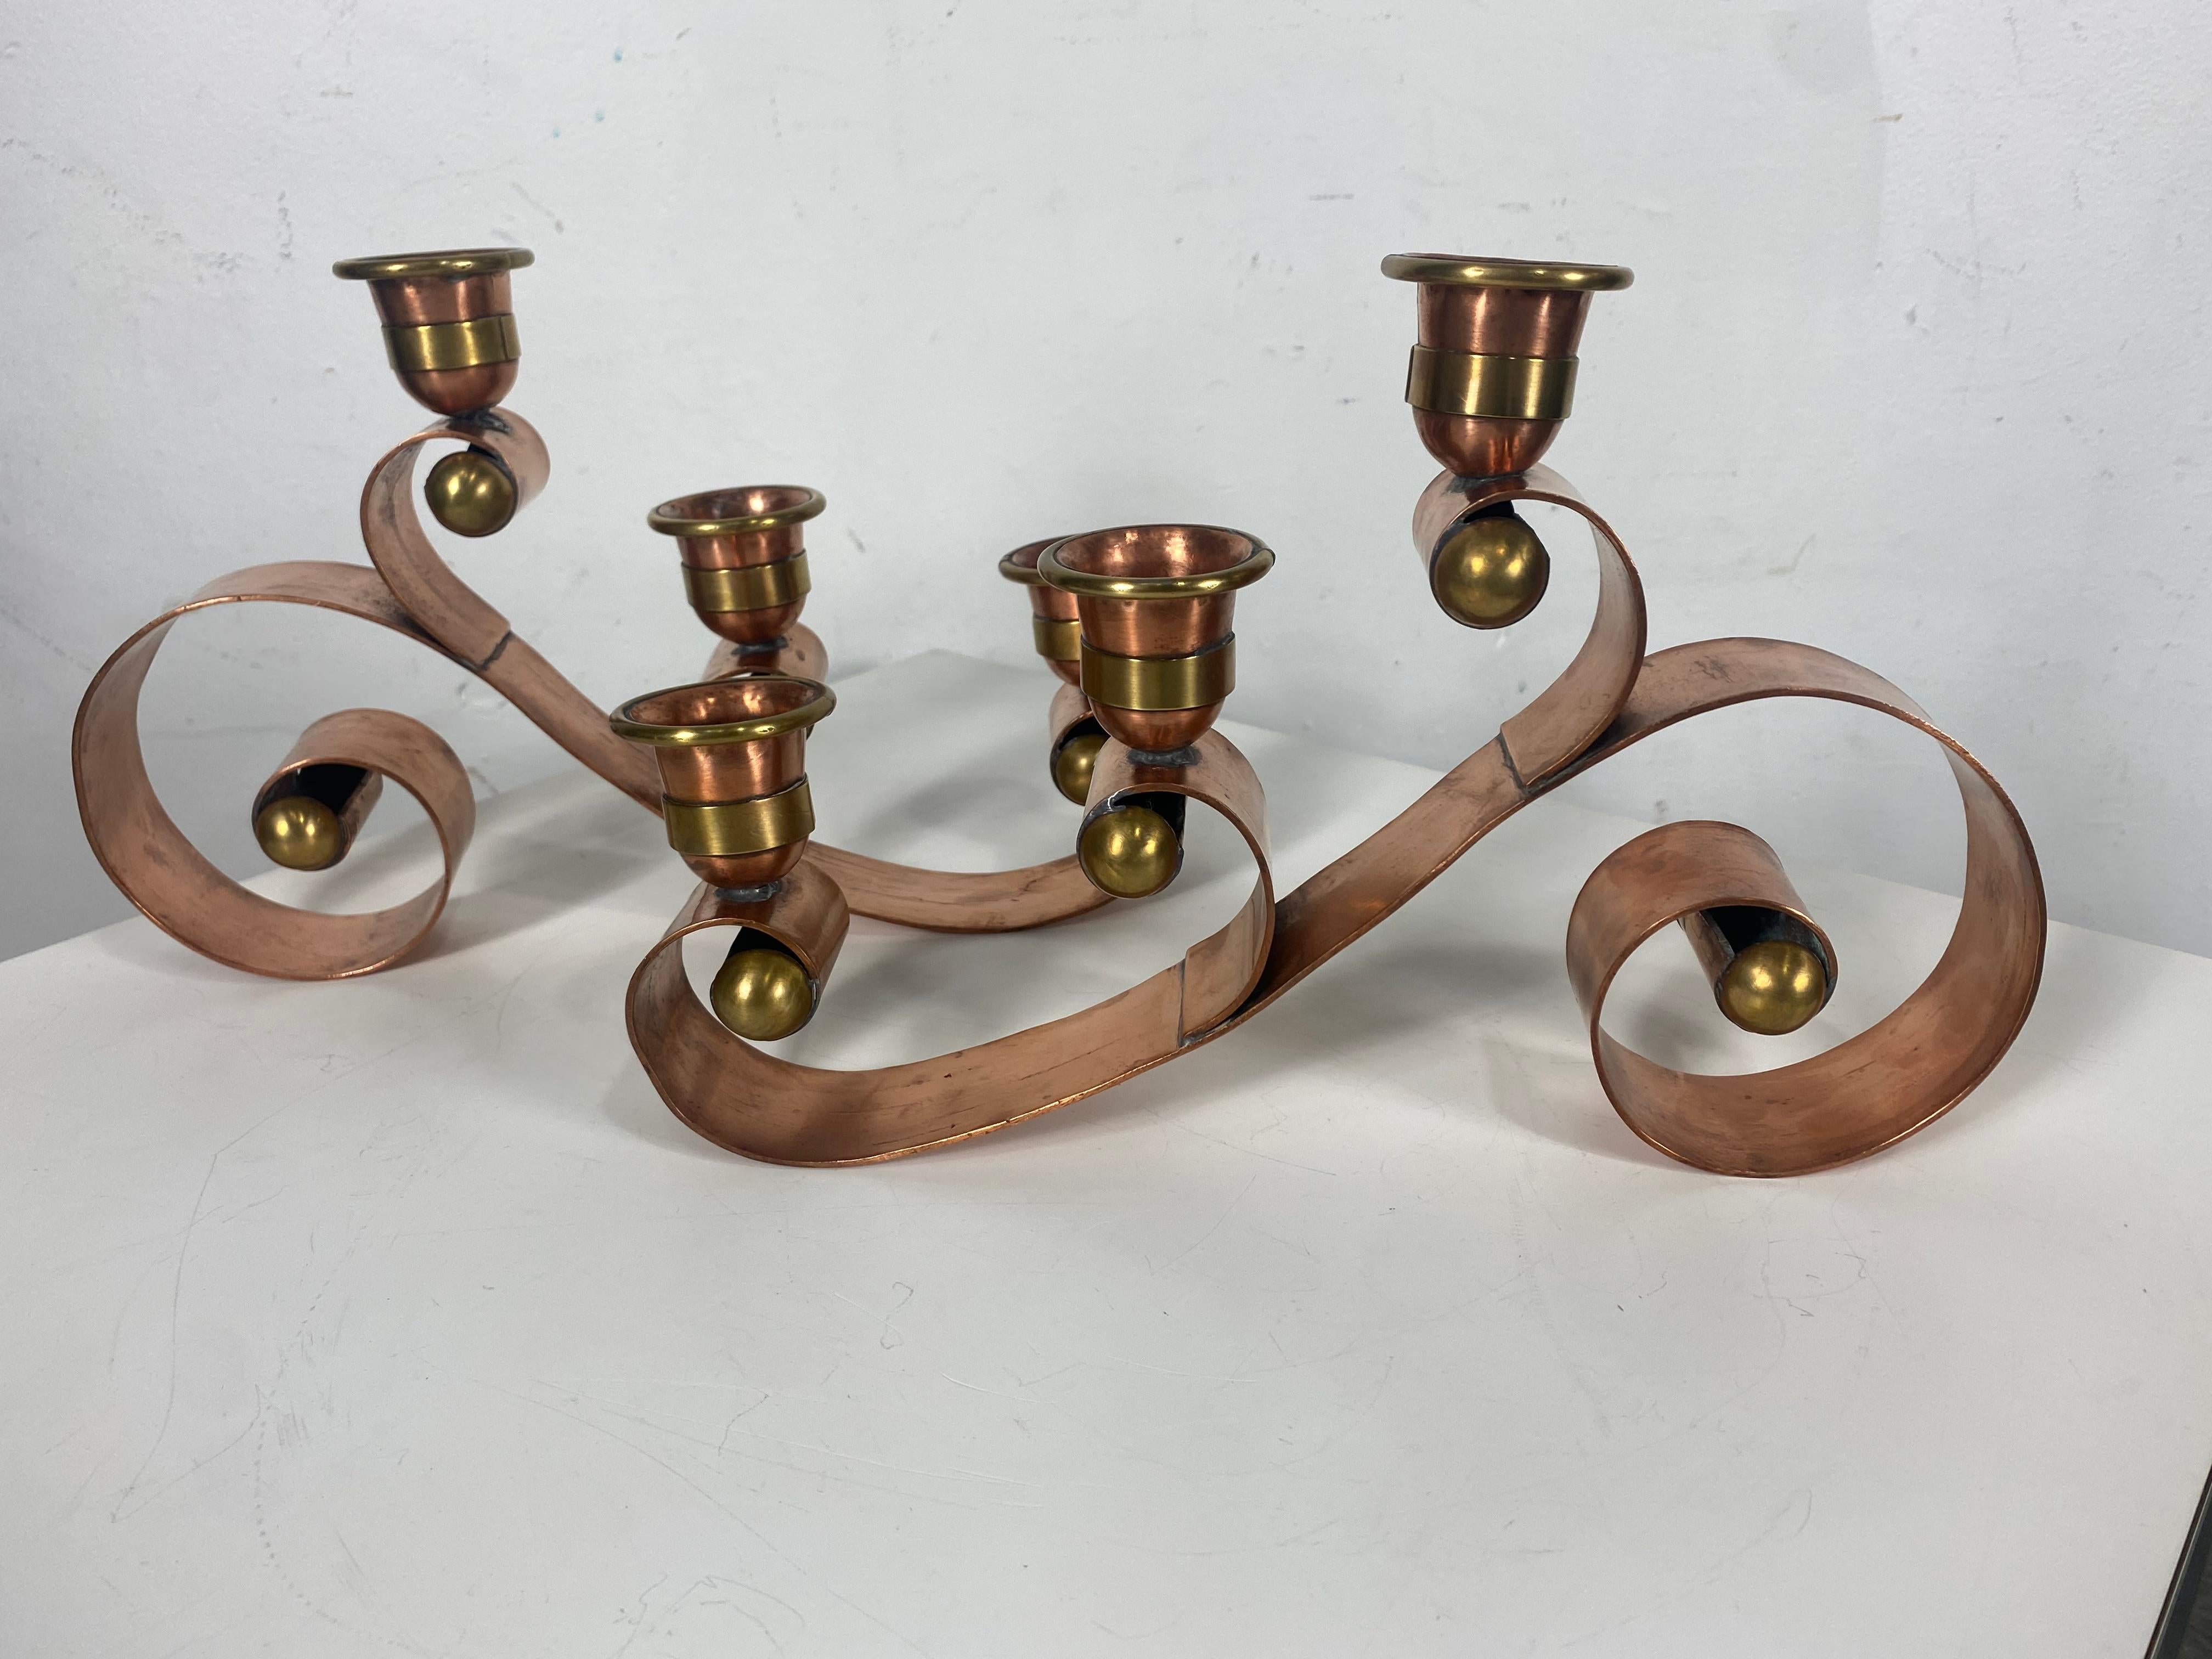 Silver Hector Aguilar Copper Brass Scroll Candelabra, Taxco Mexico, Early 1940 For Sale